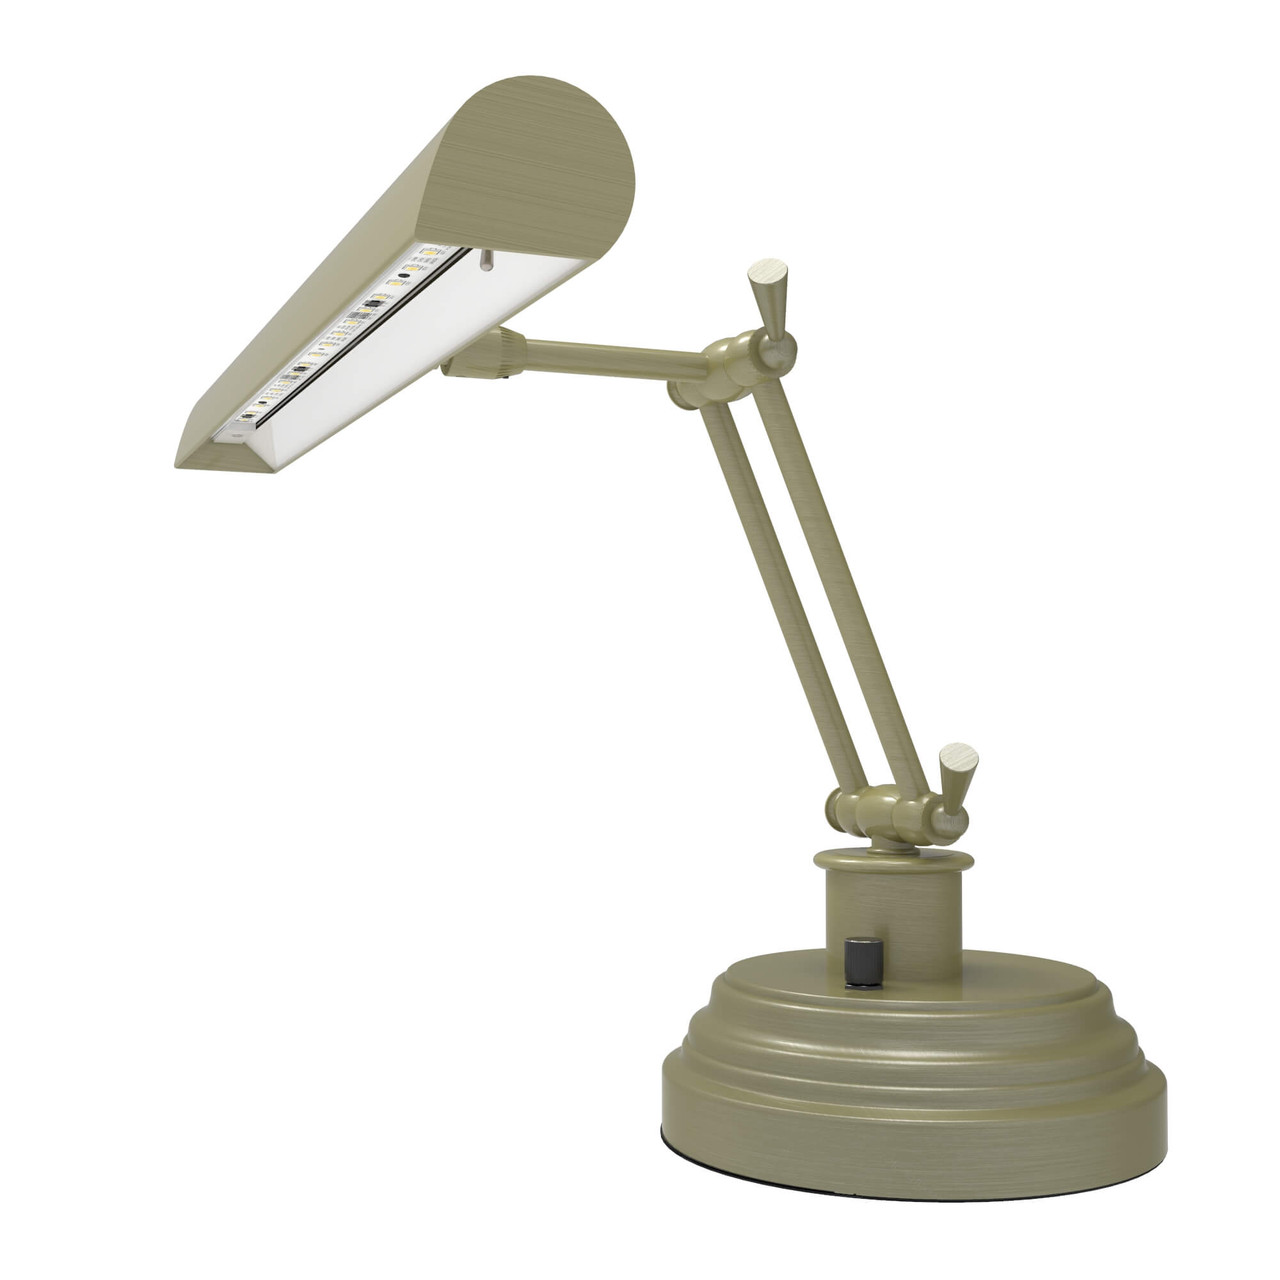 Cocoweb FLED-GPS High Powered Dimmable LED Piano Floor Lamp - 4